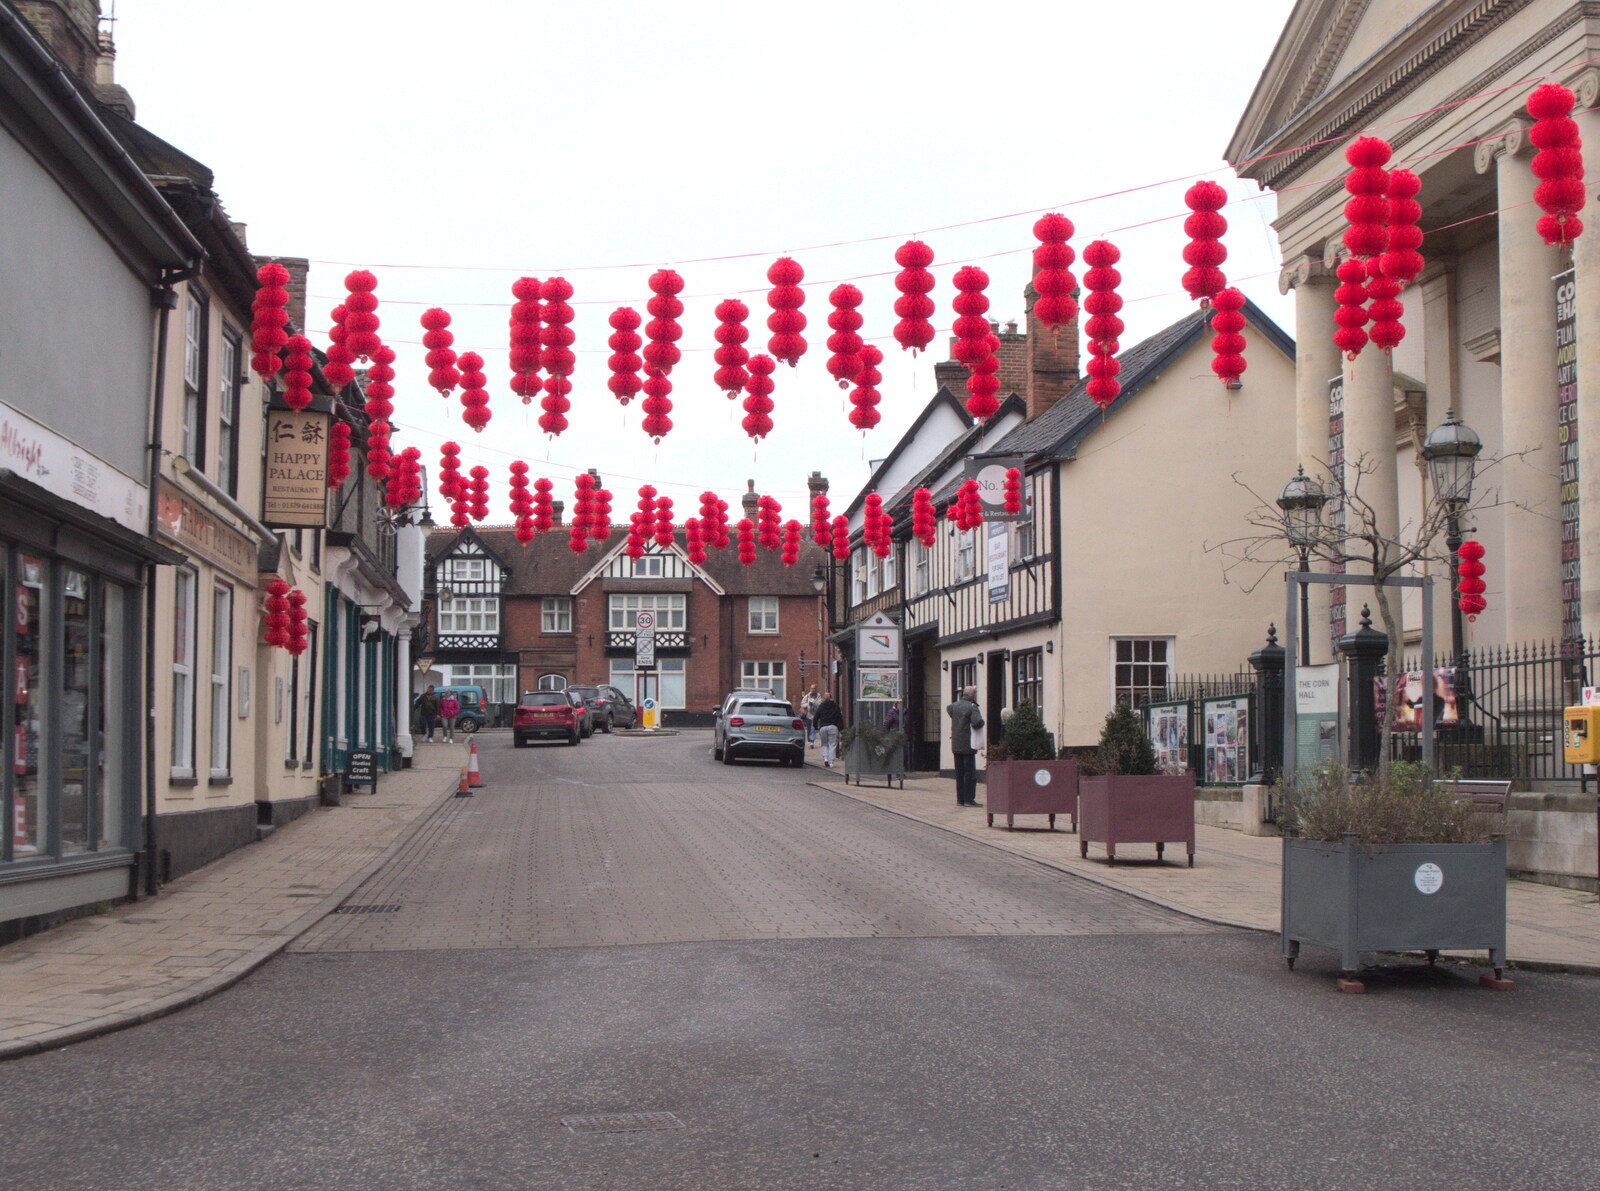 It's Chinese New Year in Diss from A Trip to Ampersand, Sawmills Road, Diss - 27th January 2023